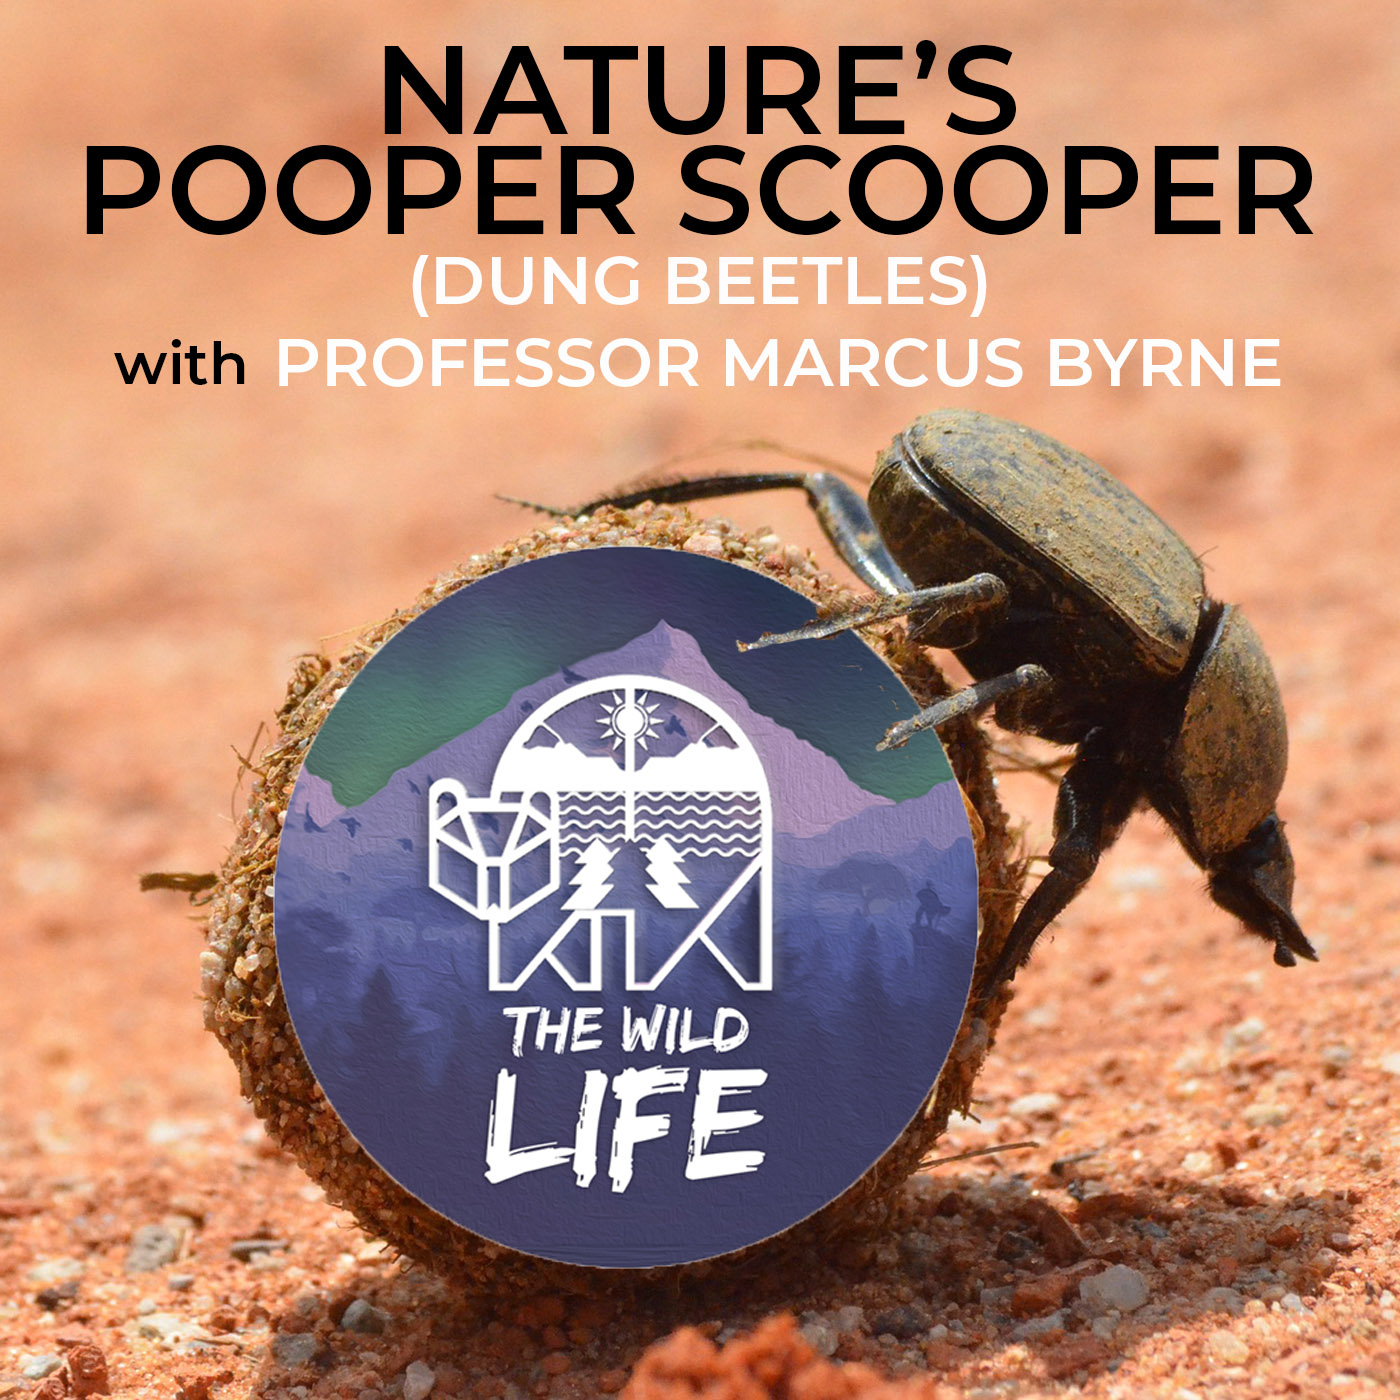 Nature’s Pooper Scooper (Dung Beetles!) with Professor Marcus Byrne